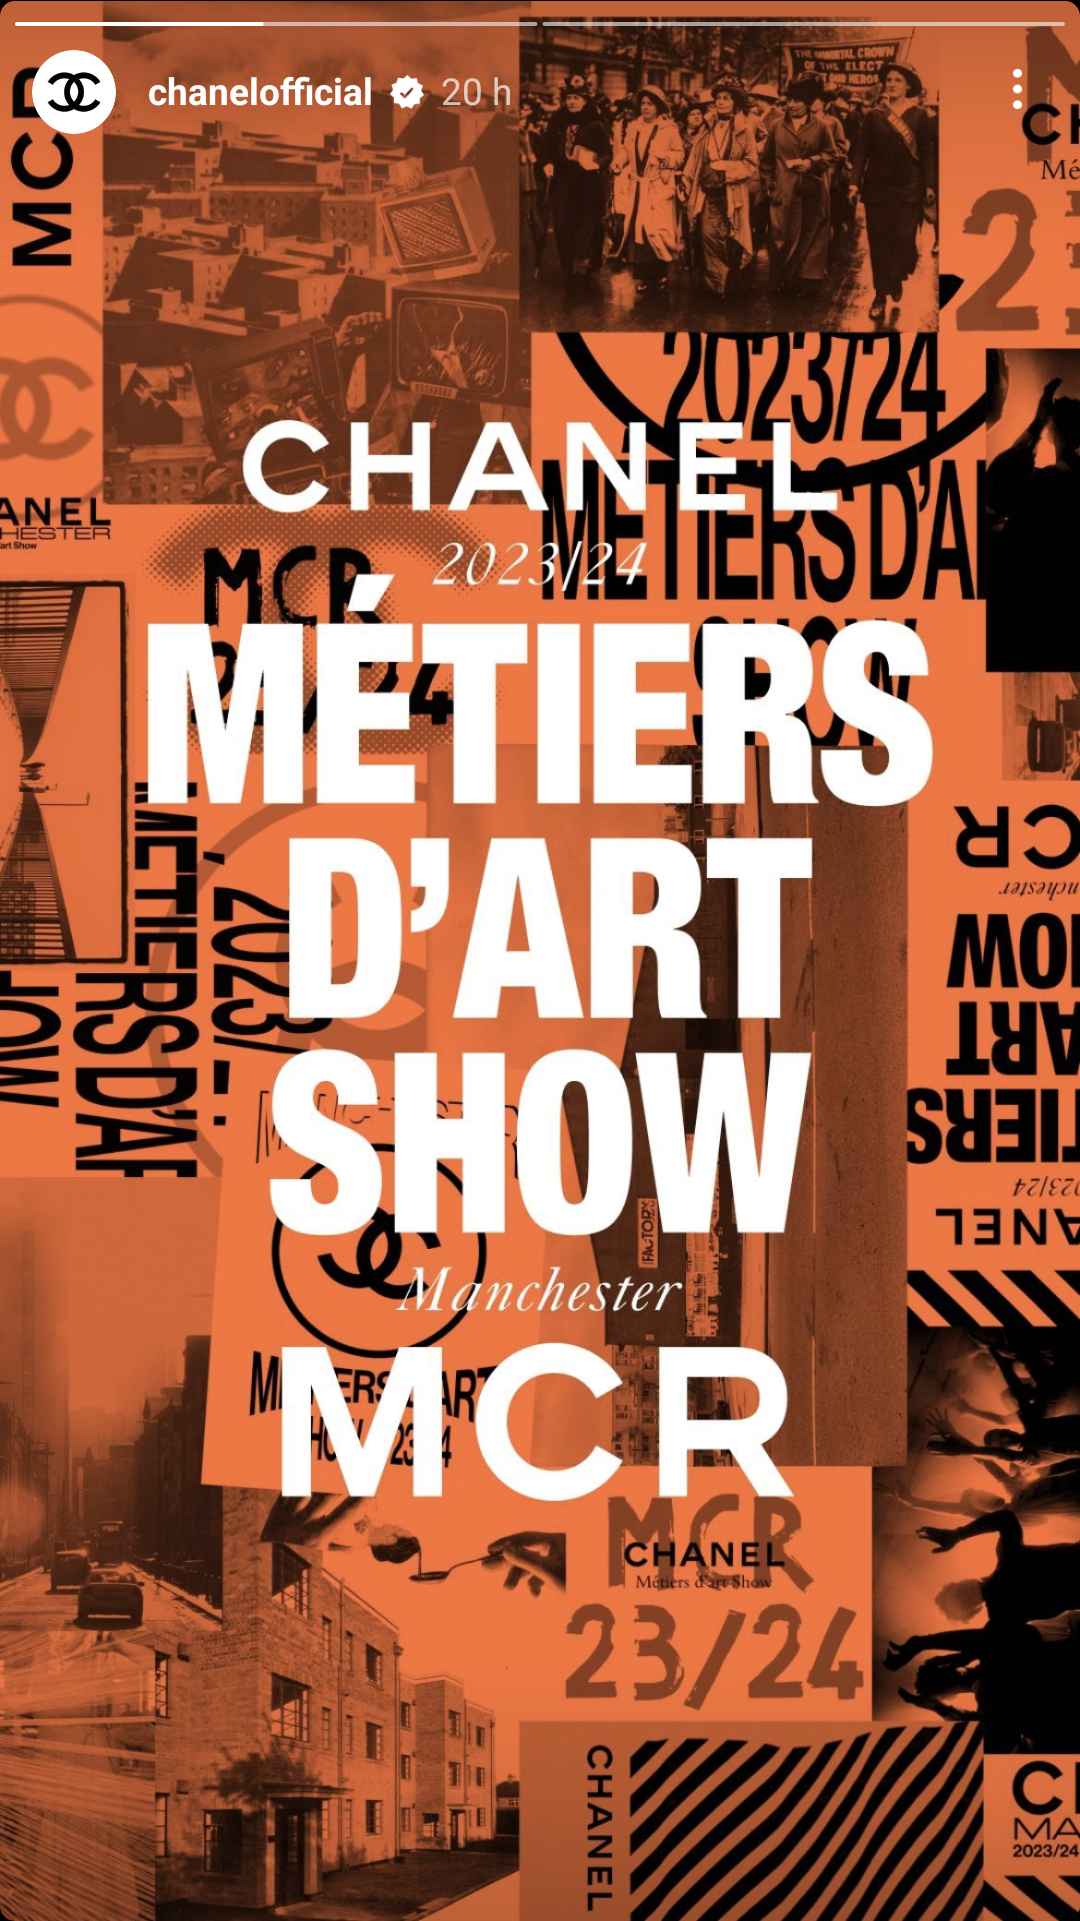 Chanel's post promoting its Chanel's Metiers D'Art show in Manchester